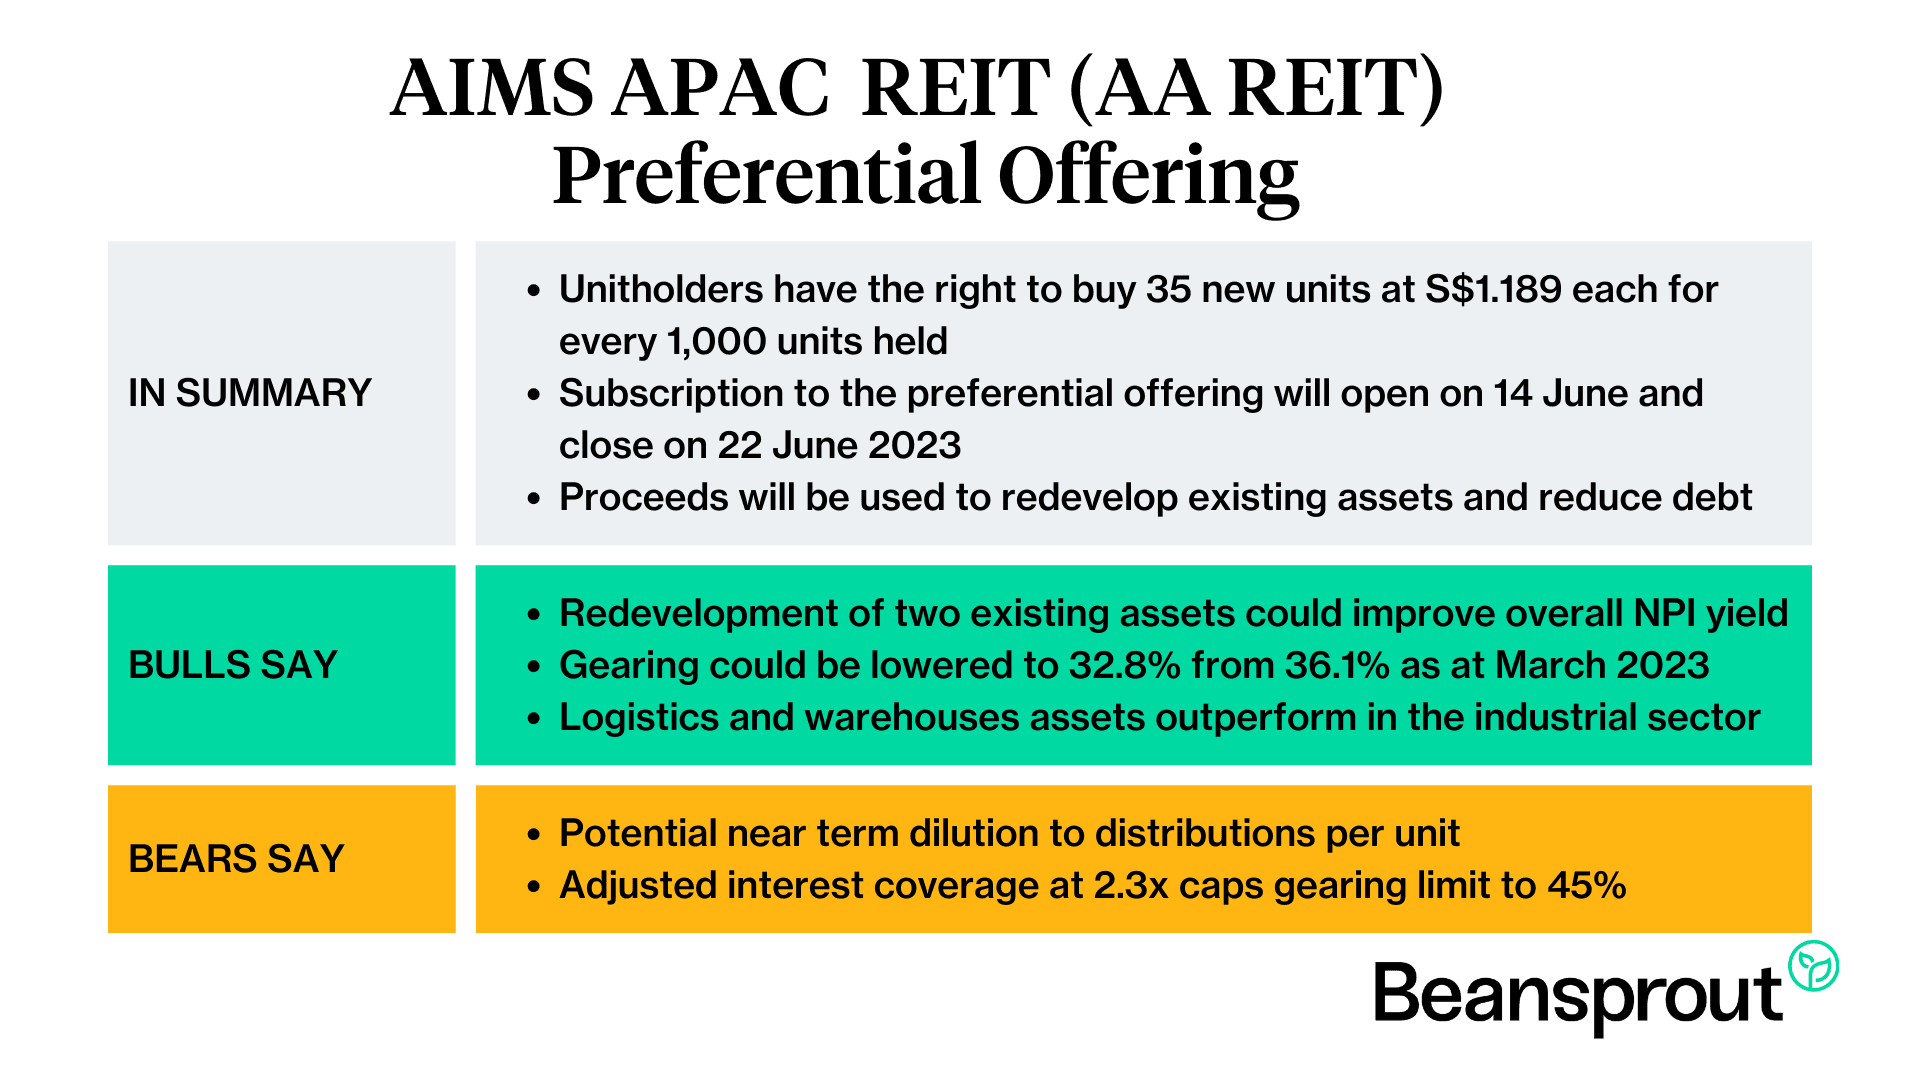 AA REIT preferential offering 2023 summary